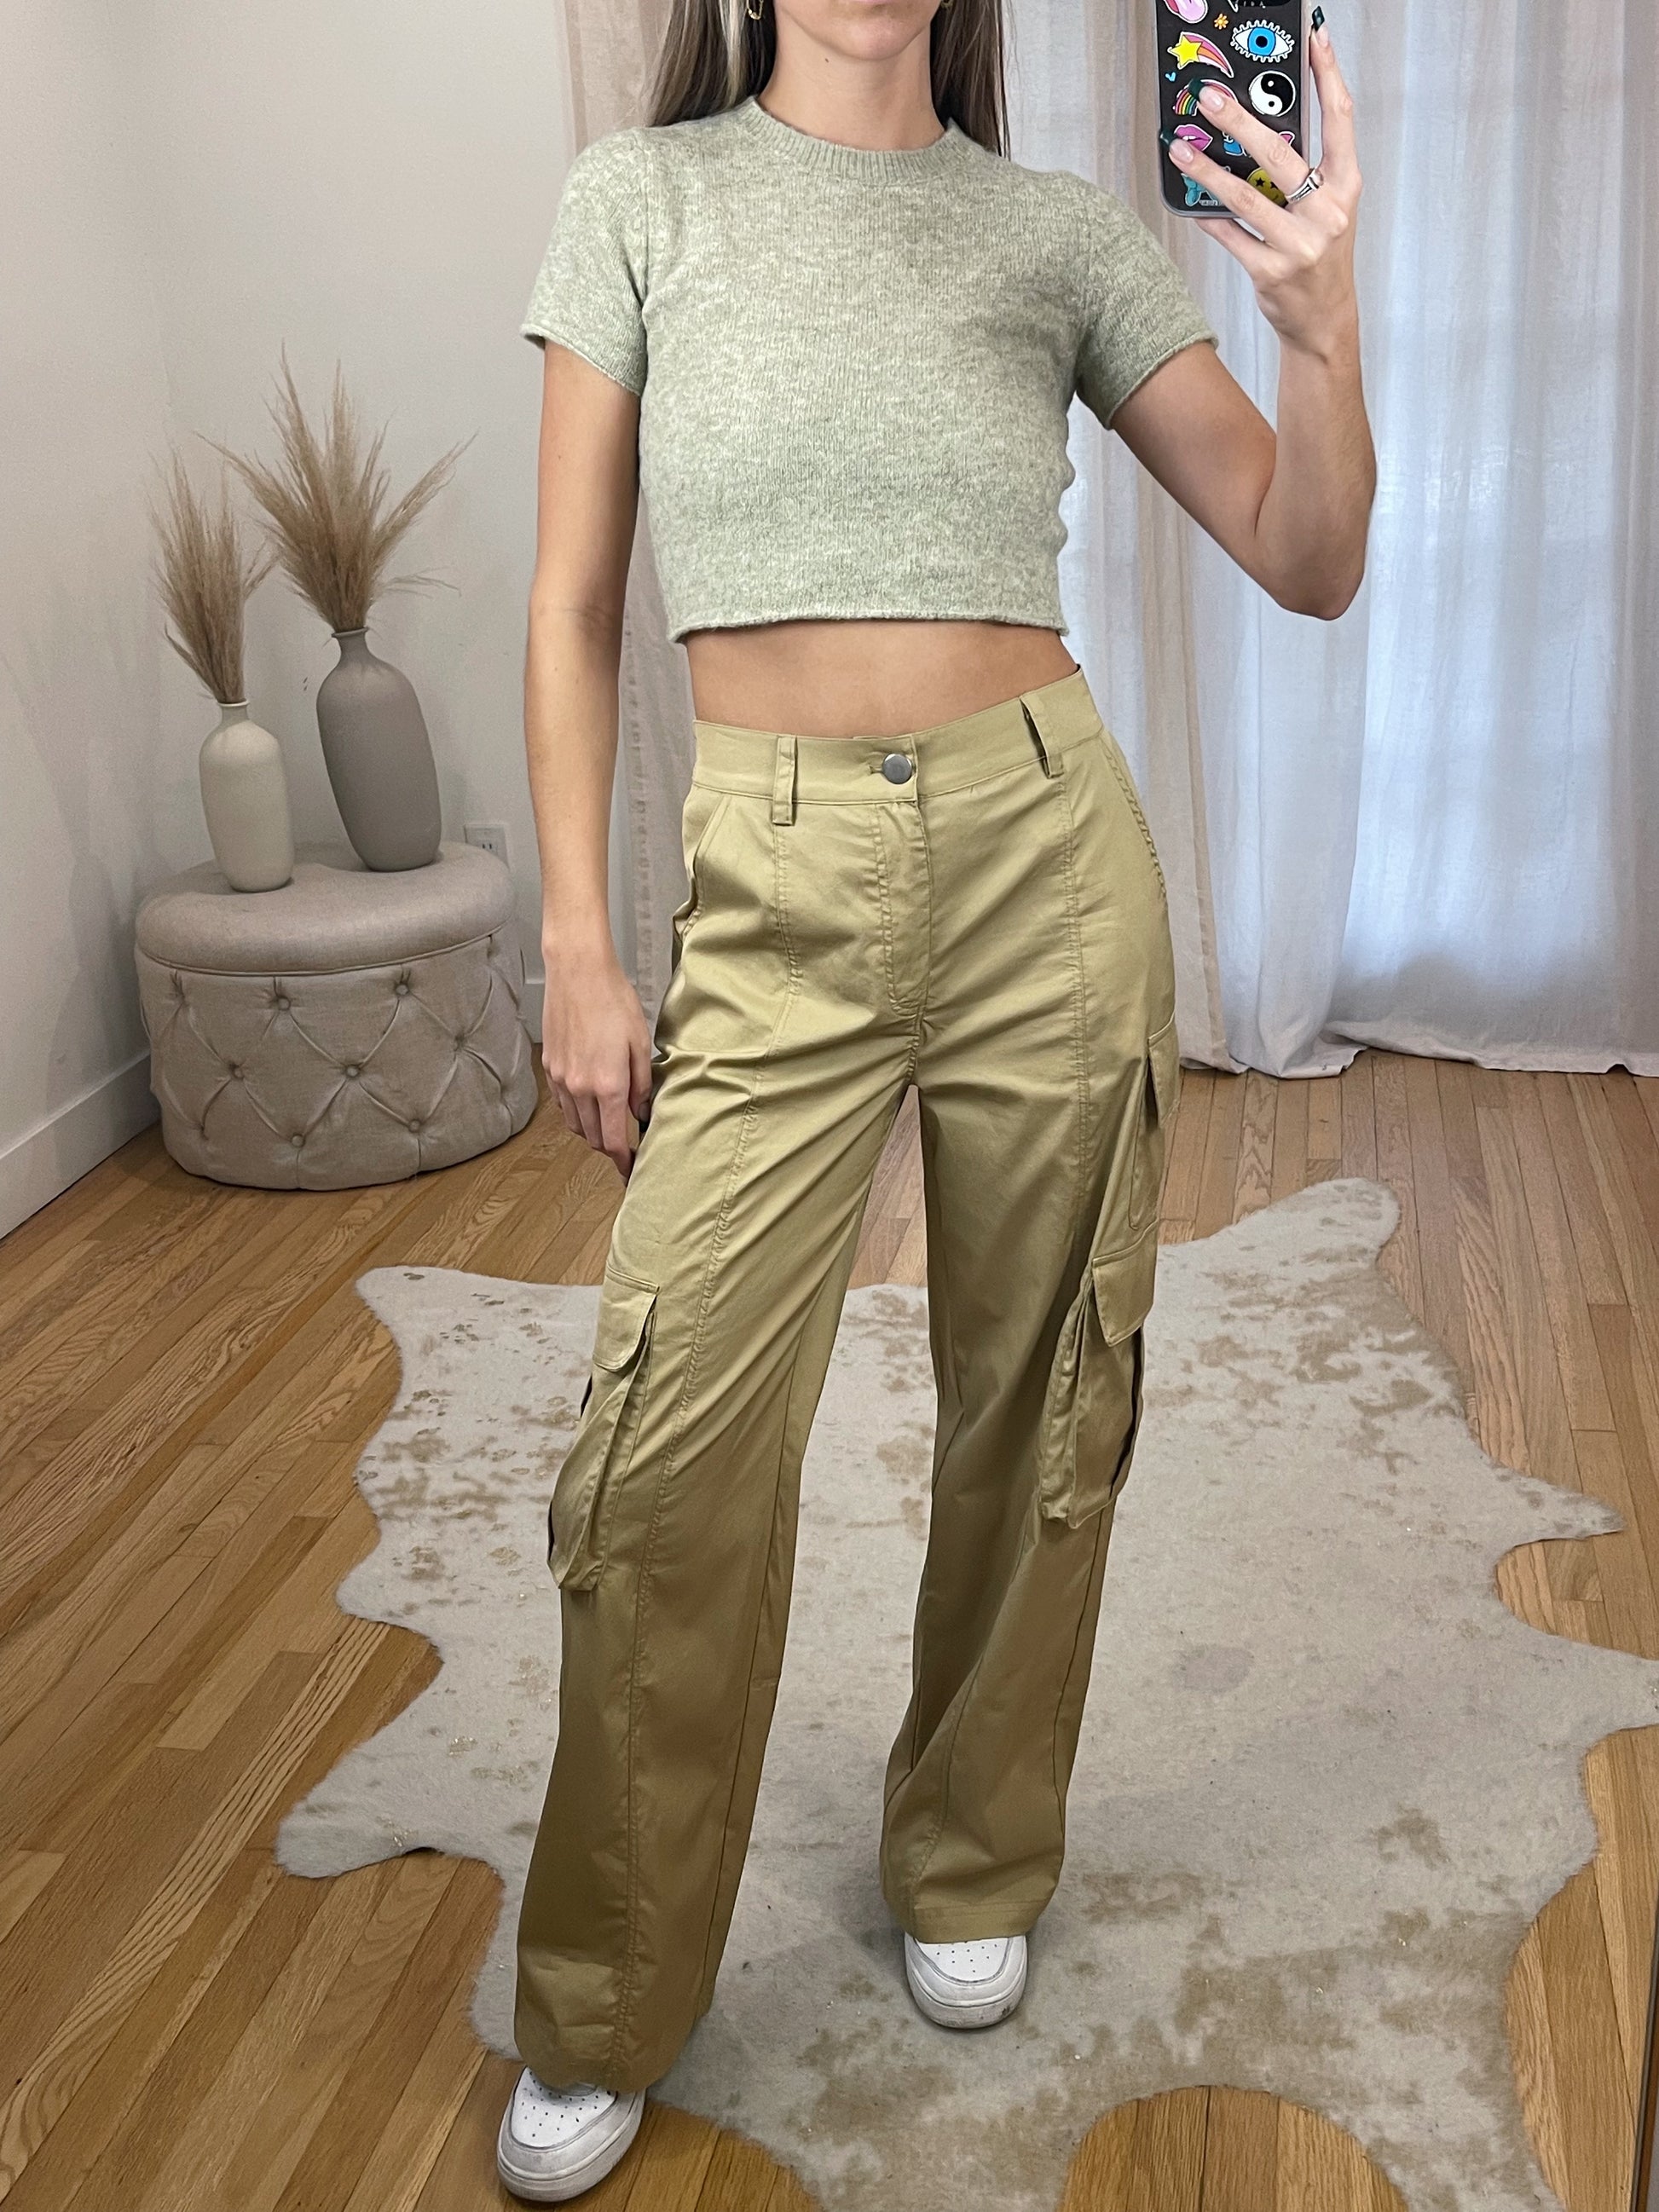 Beige Pants Outfits For Women (265 ideas & outfits)